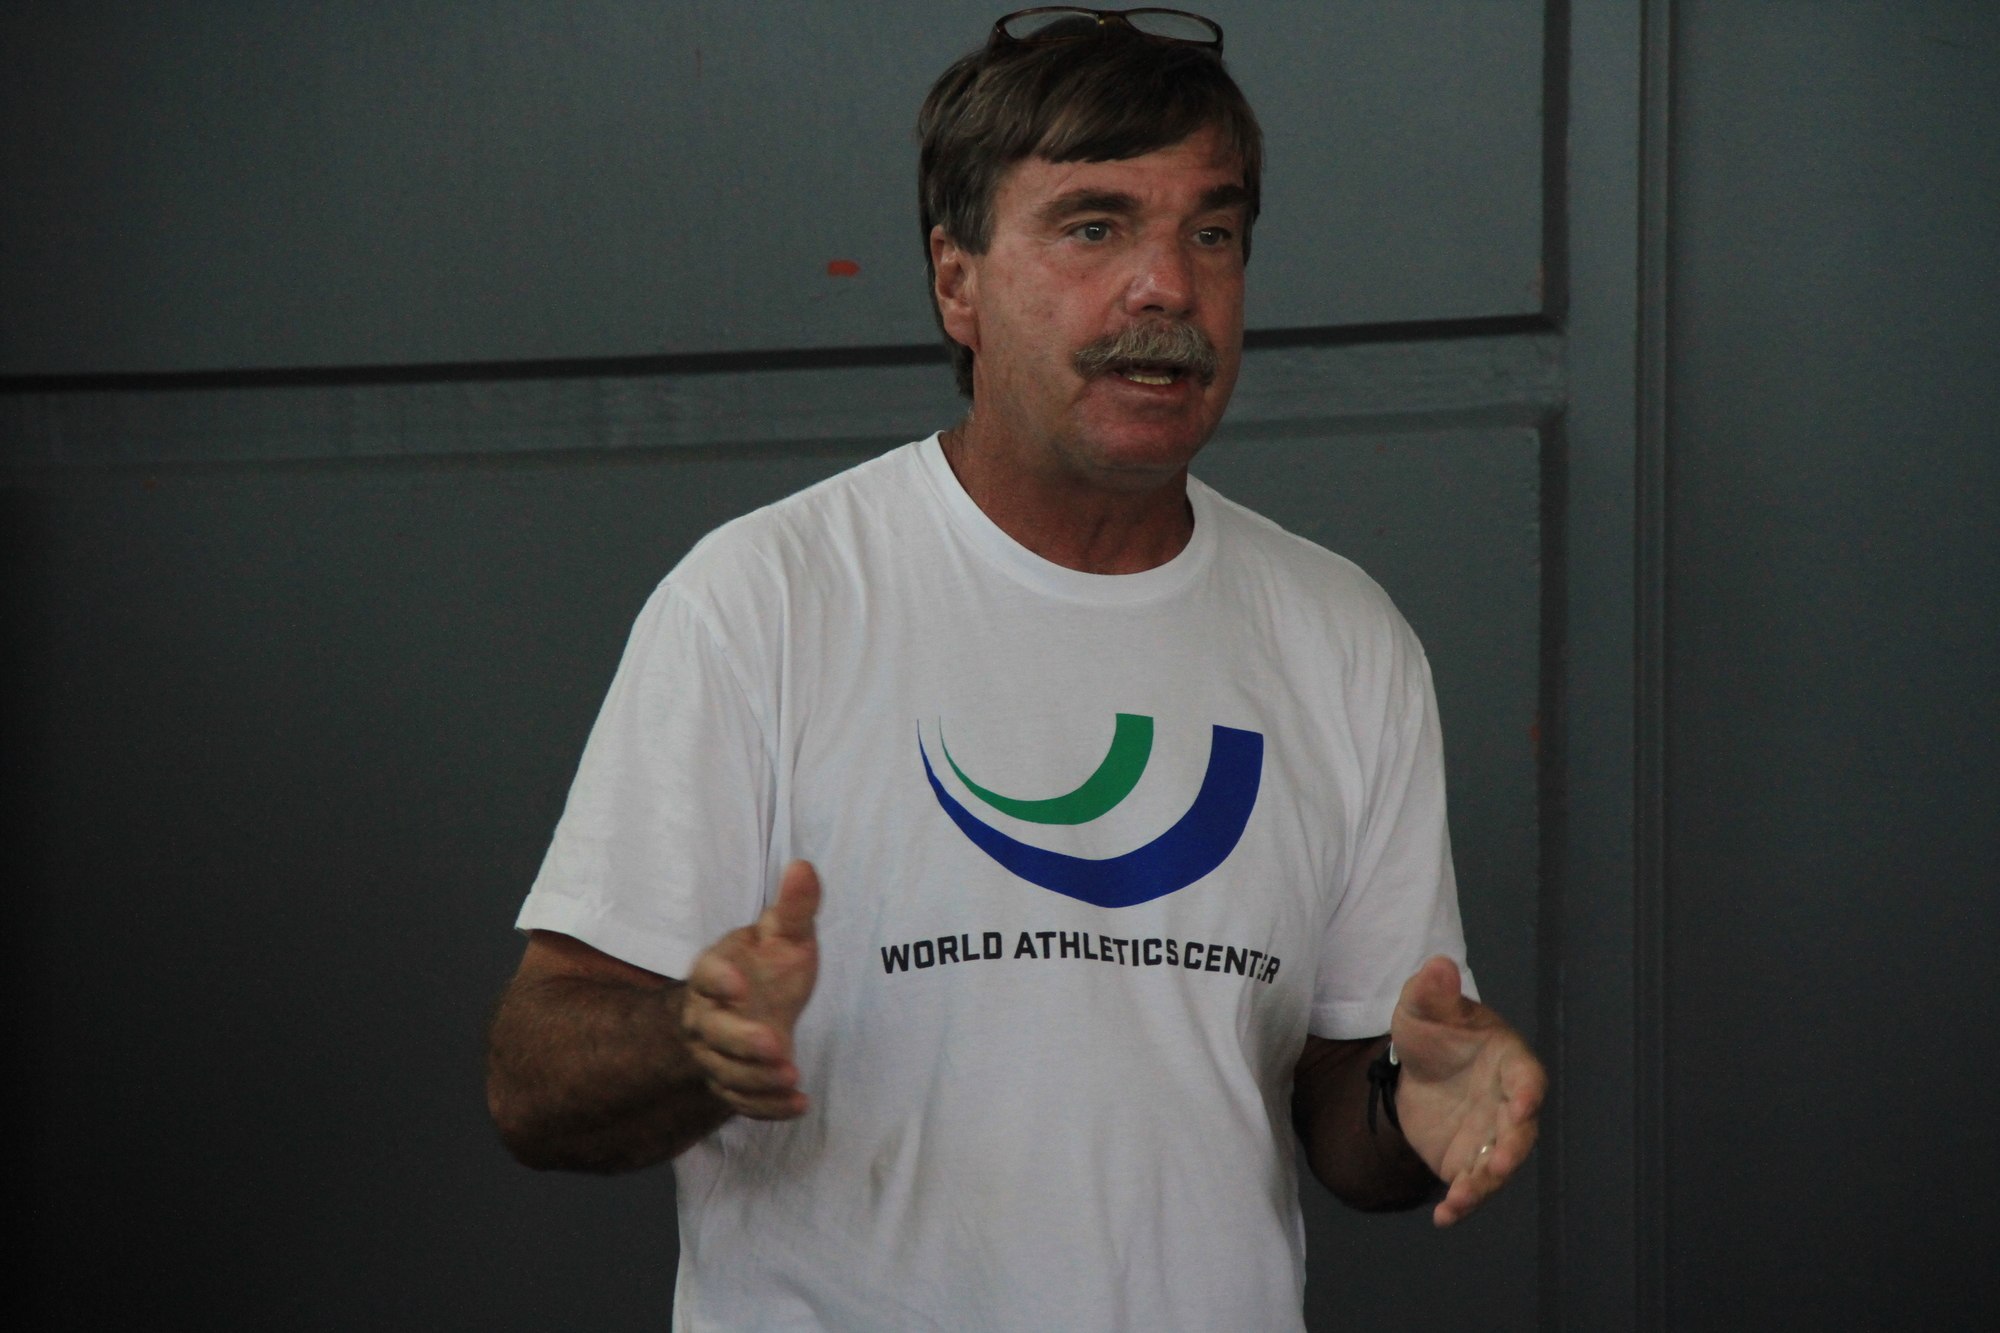 "Most great coaches I've been around have more fluid periodization than traditionally seen."  Dan Pfaff